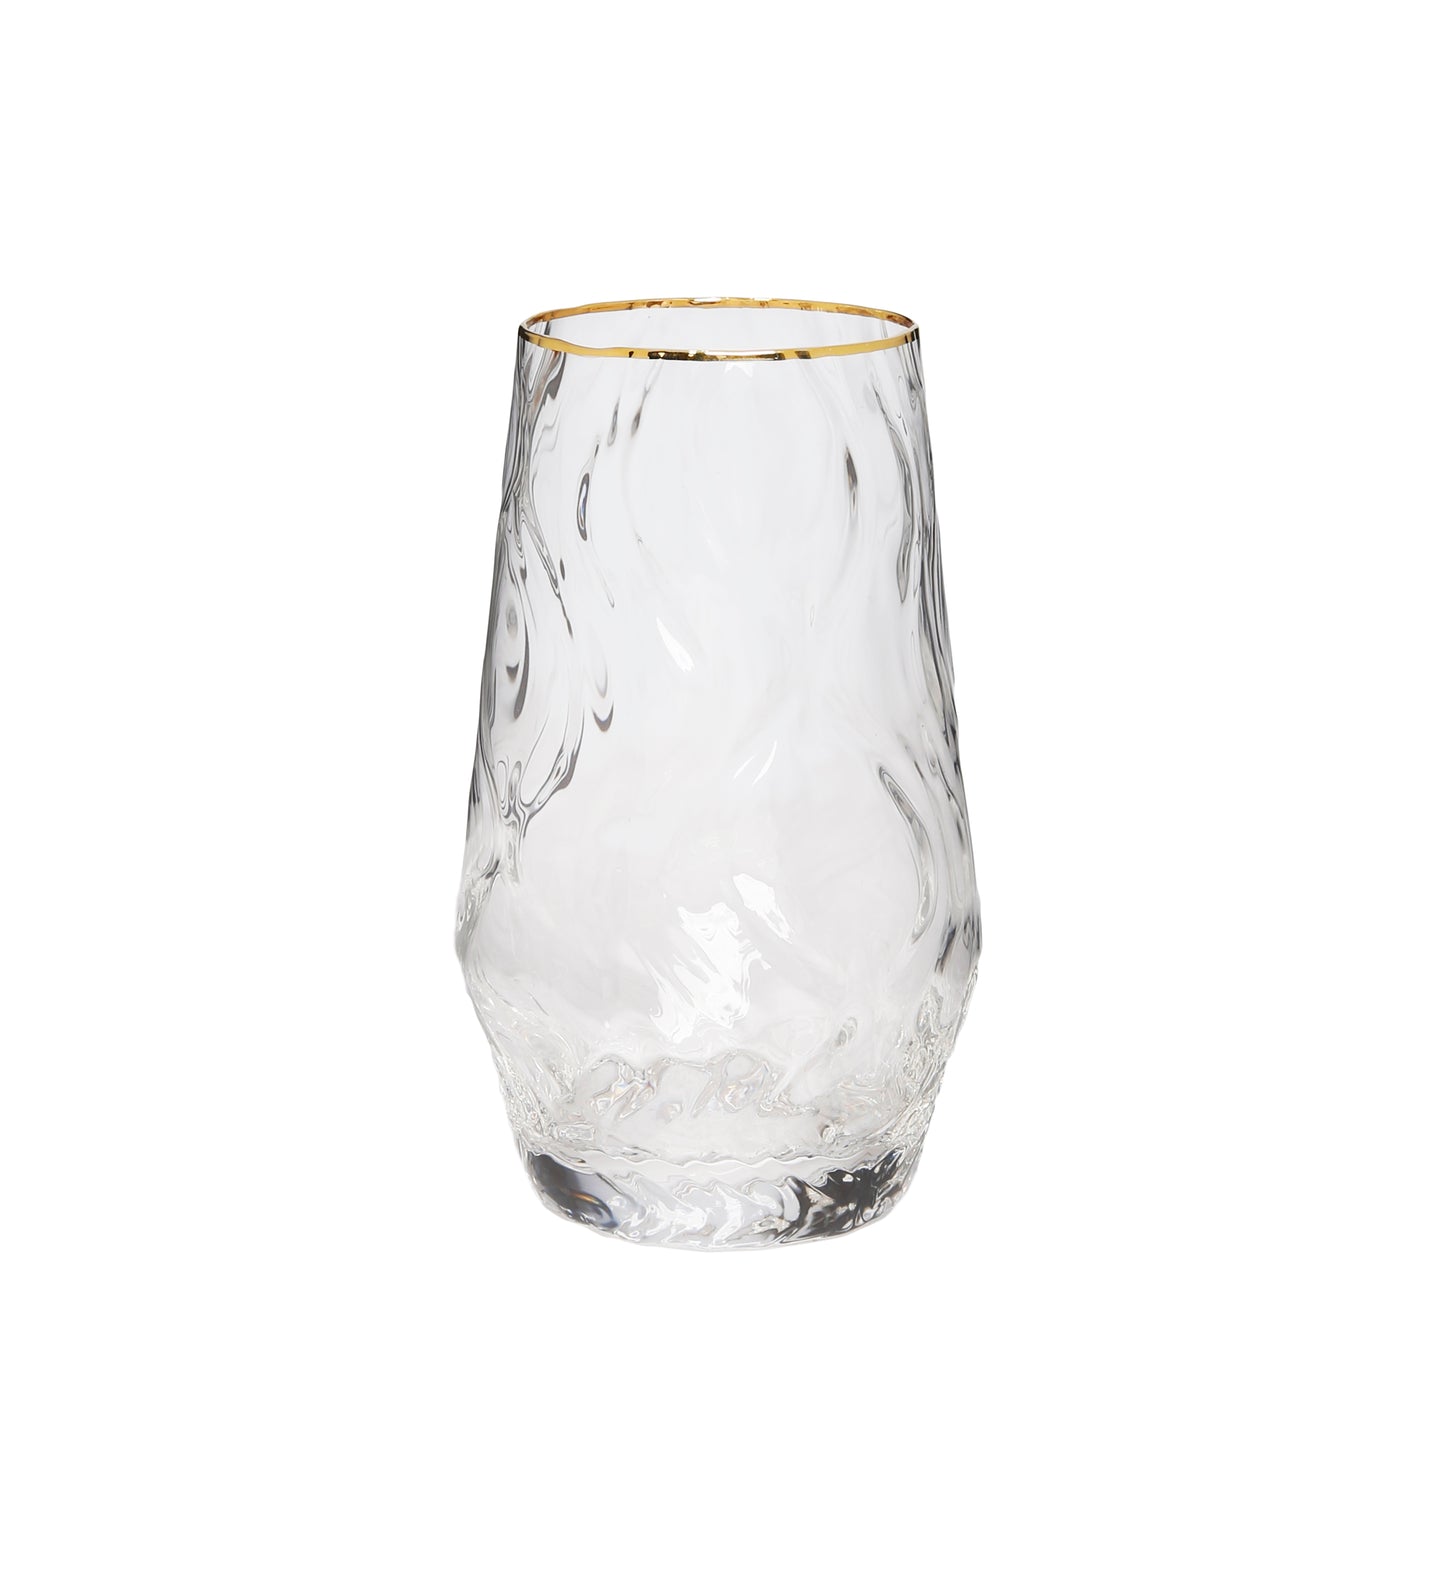 Set of 6 Tumblers with Gold Rim